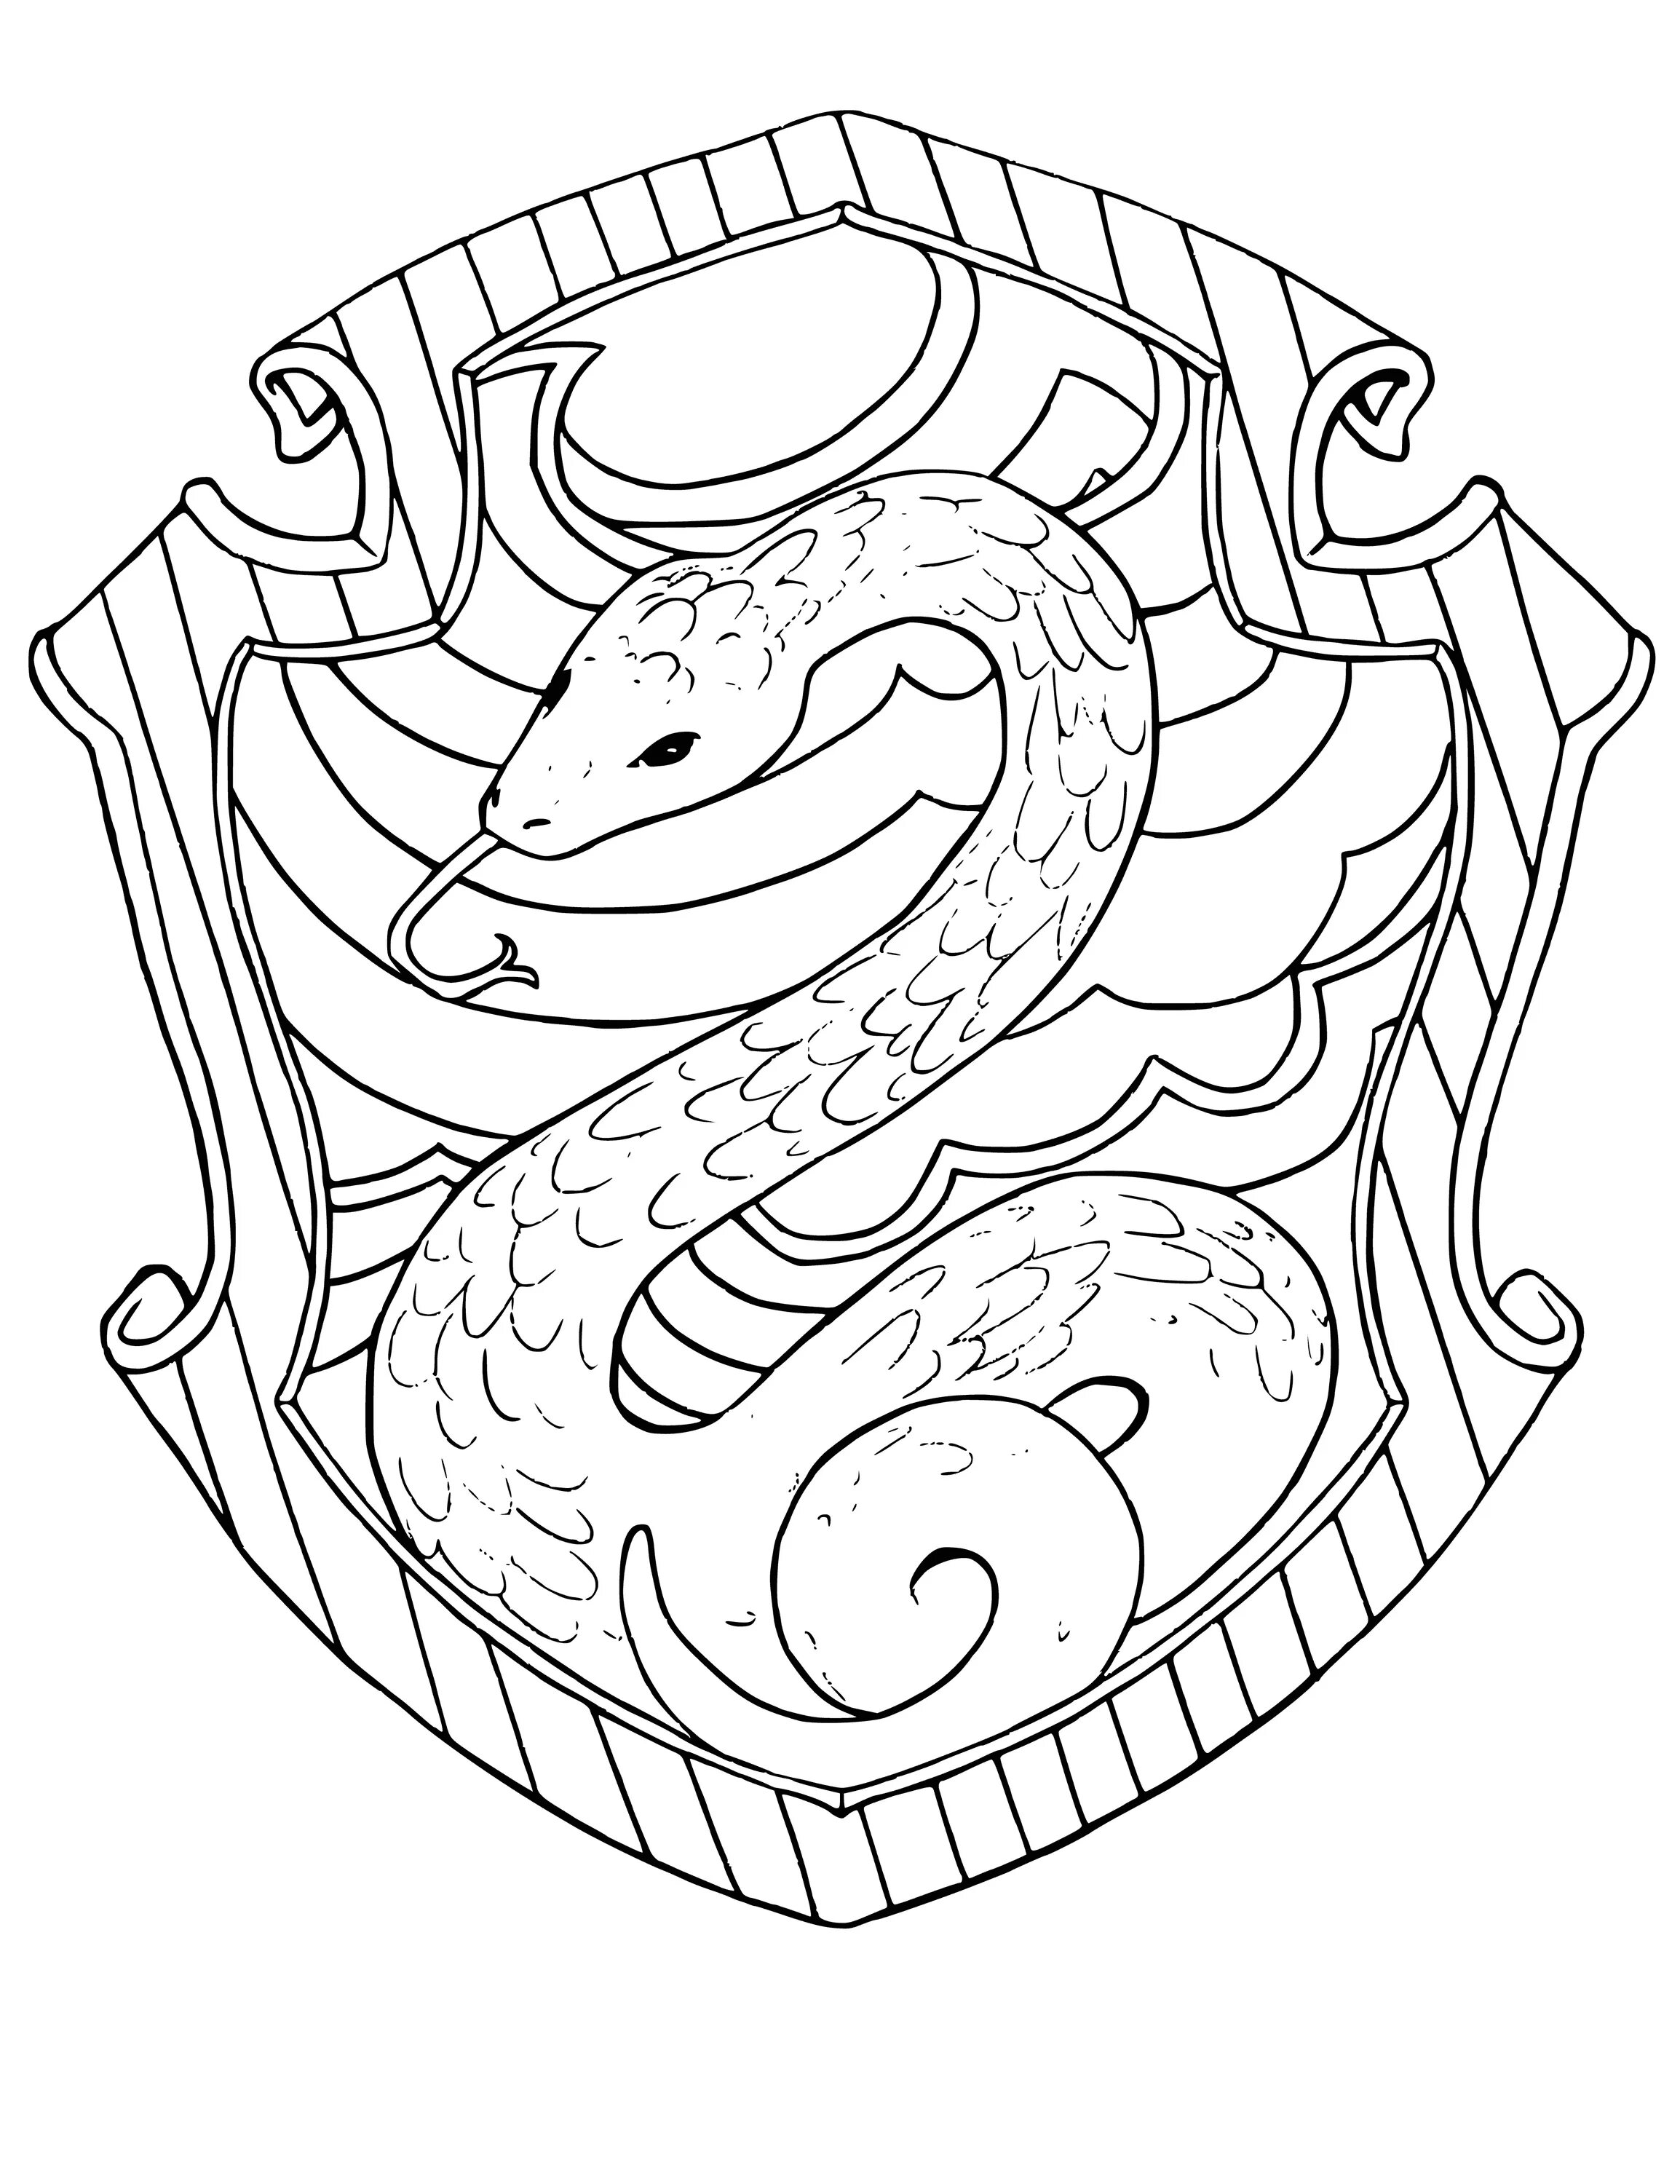 Slytherin coat of arms #12